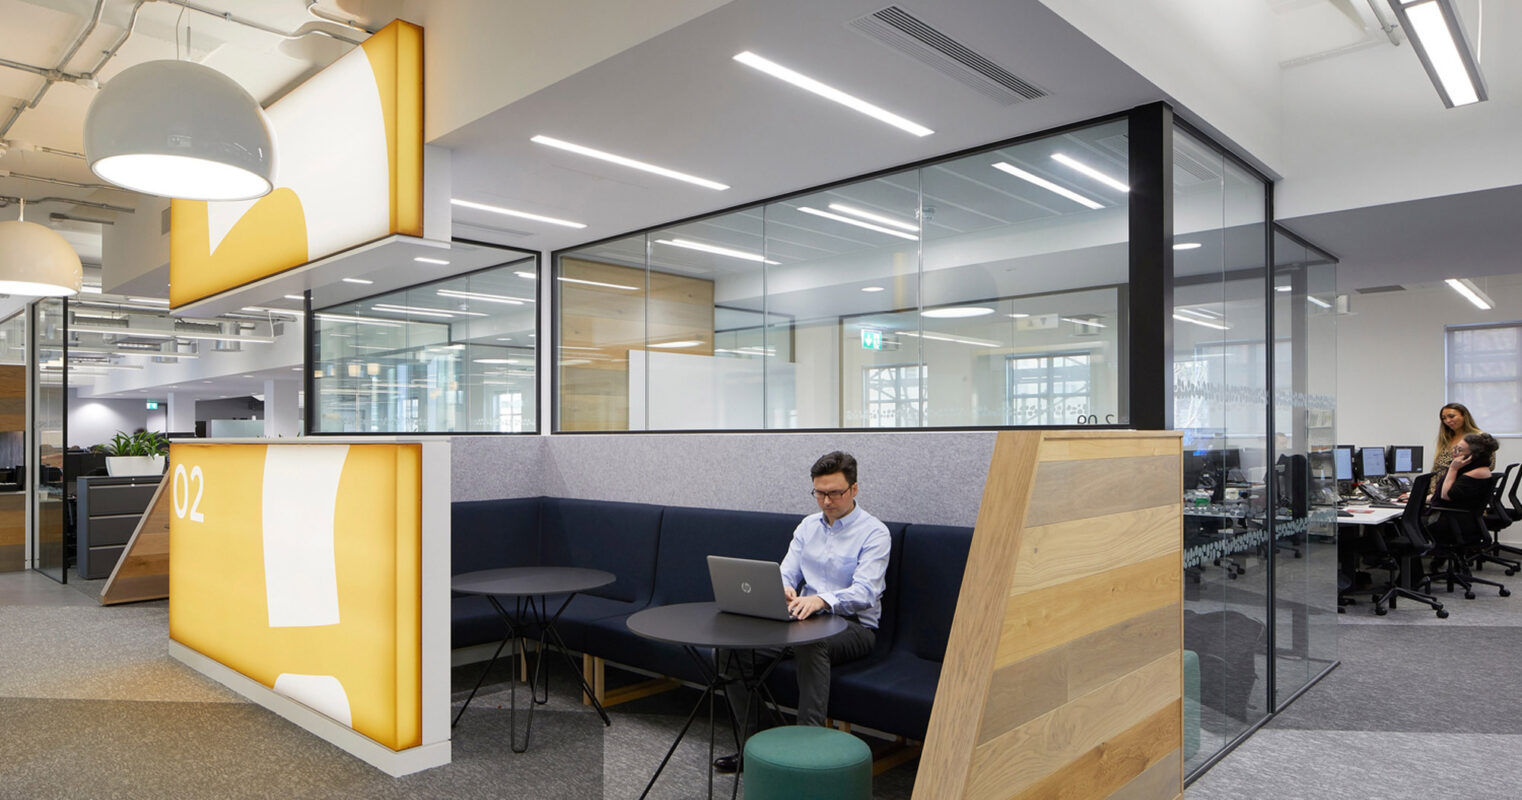 Modern workplace featuring an open floor plan with clear glass partitions, integrated yellow and blue acoustic panels, ambient pendant lighting, and ergonomic furniture. A professional works focused at a mobile laptop station against a minimalist yet vibrant design backdrop.